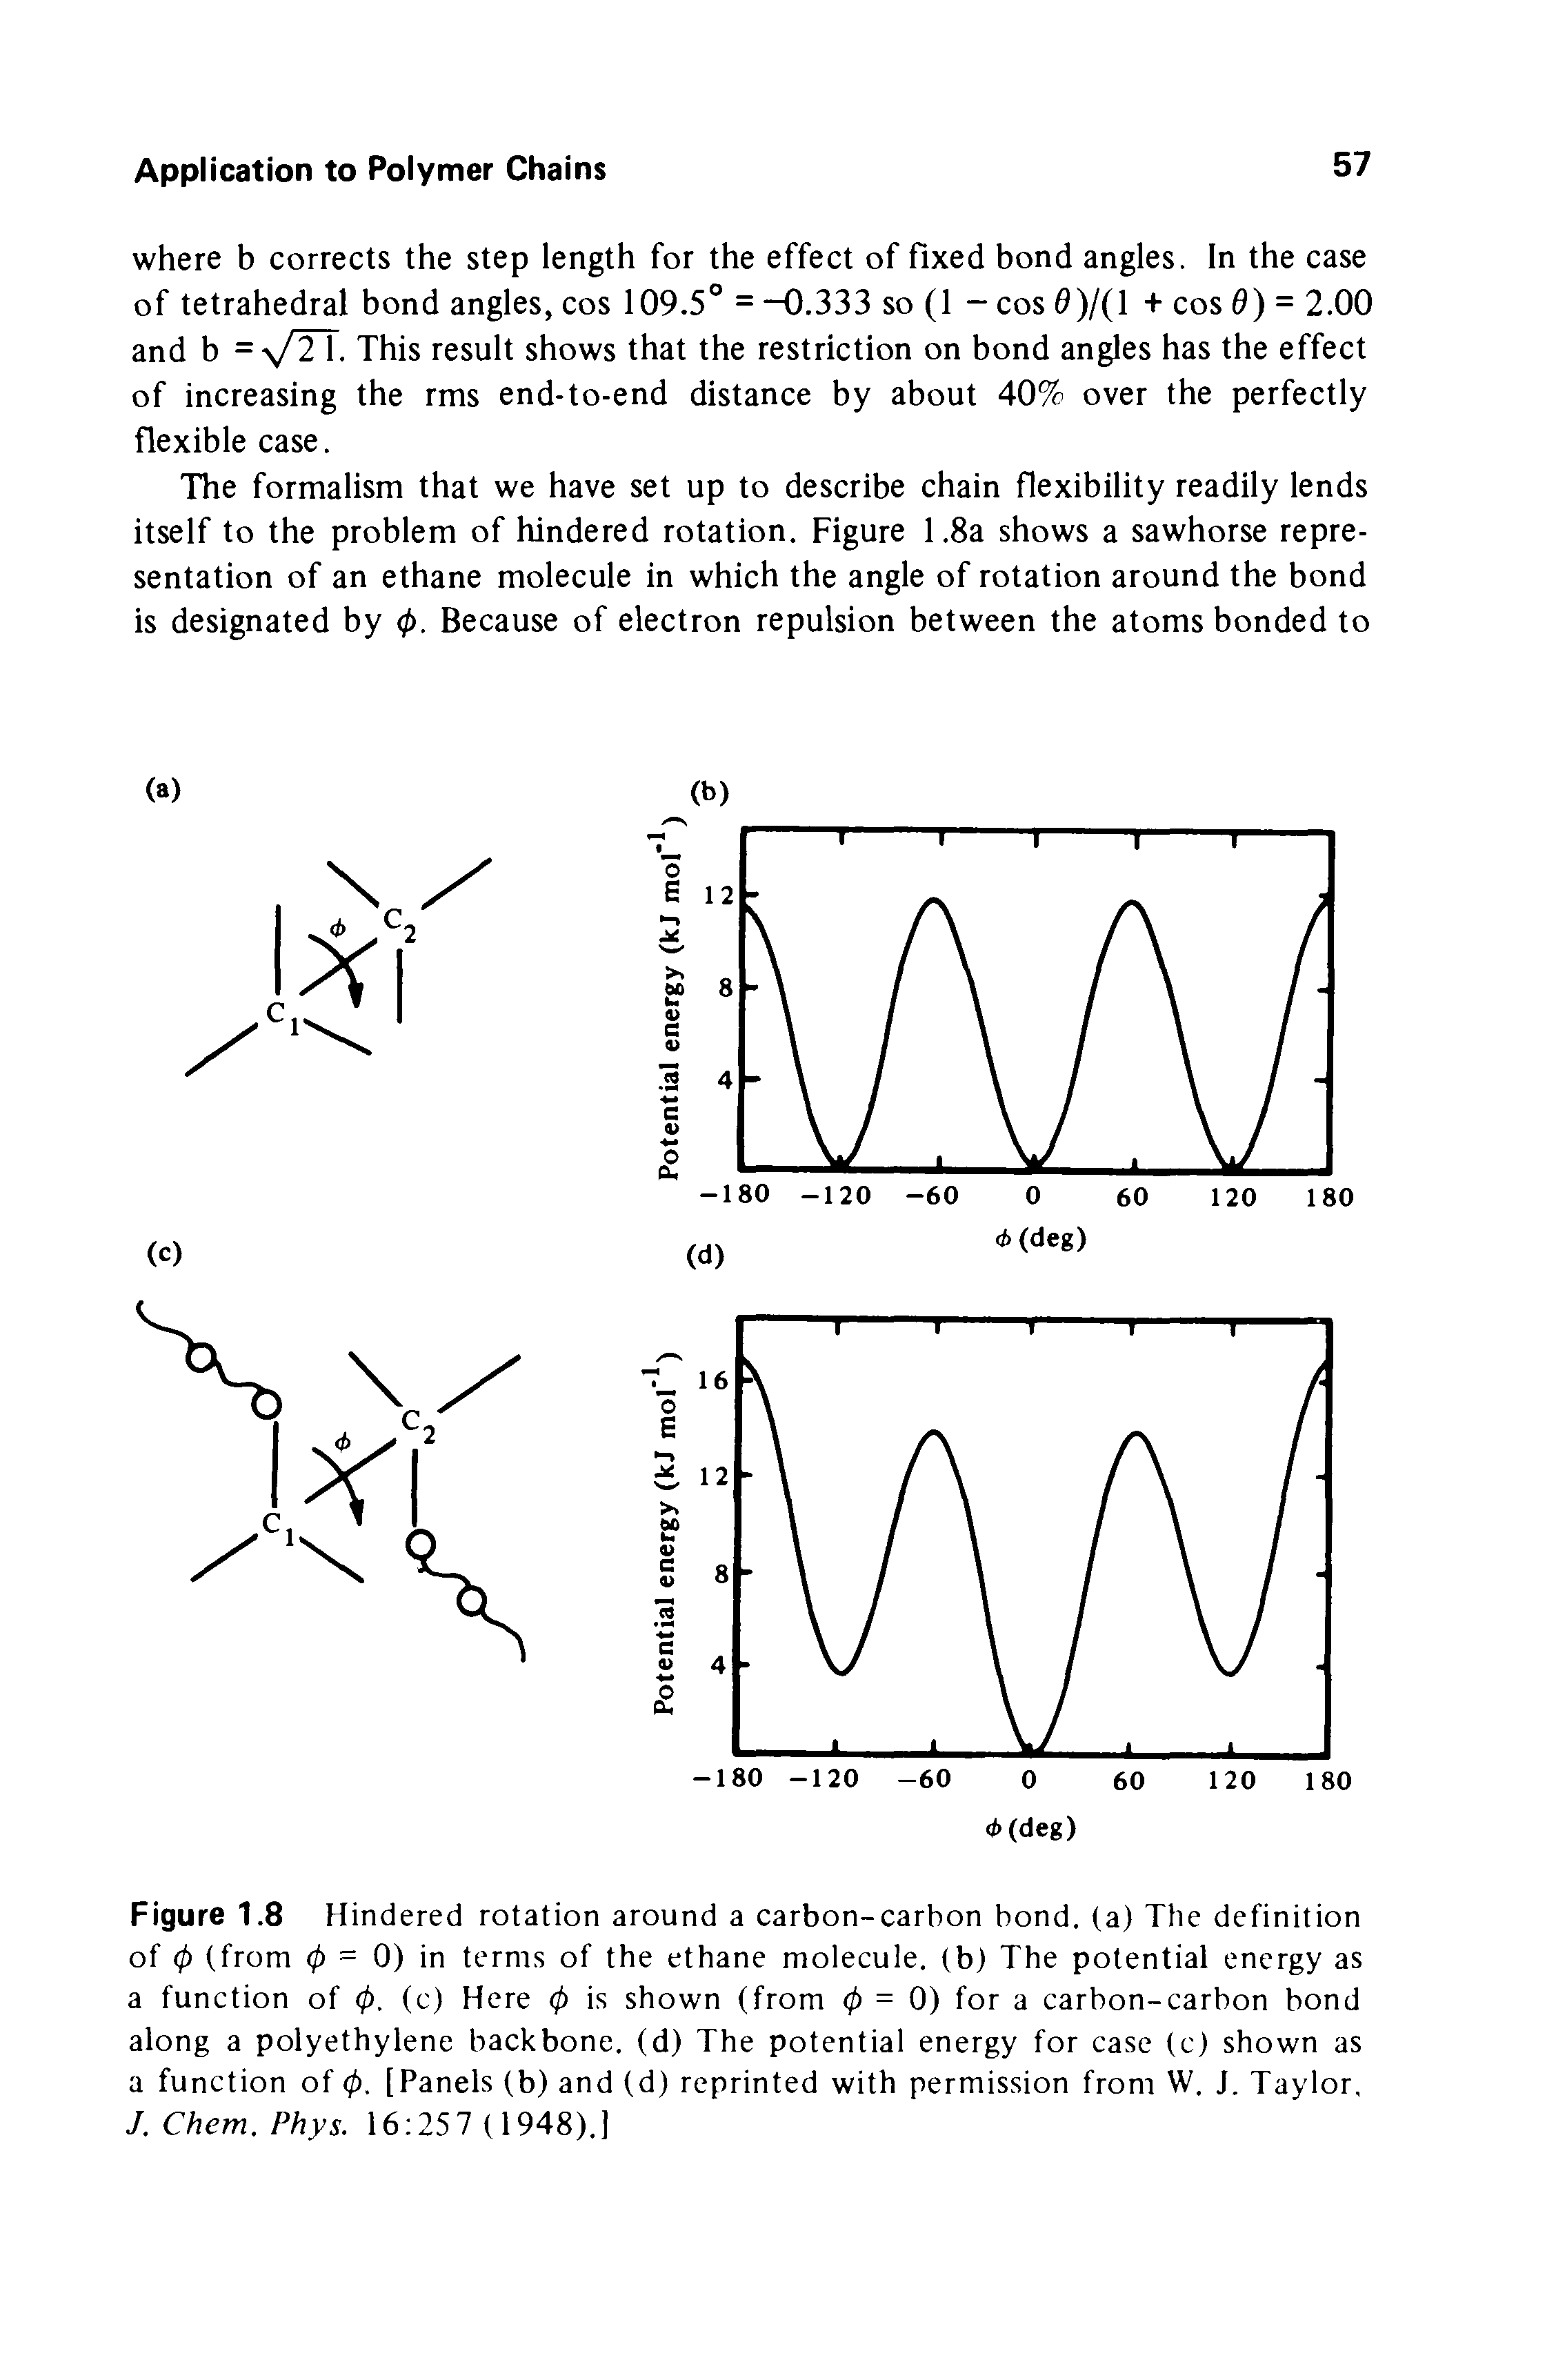 Figure 1.8 Hindered rotation around a carbon-carbon bond, (a) The definition of (p (from 0 = 0) in terms of the ethane molecule, (b) The potential energy as a function of (p. (c) Here (p is shown (from (p = 0) for a carbon-carbon bond along a polyethylene backbone, (d) The potential energy for case (c) shown as a function of (p. [Panels (b) and (d) reprinted with permission from W. J. Taylor, J.Chem.Phys. 16 257 (1948).]...